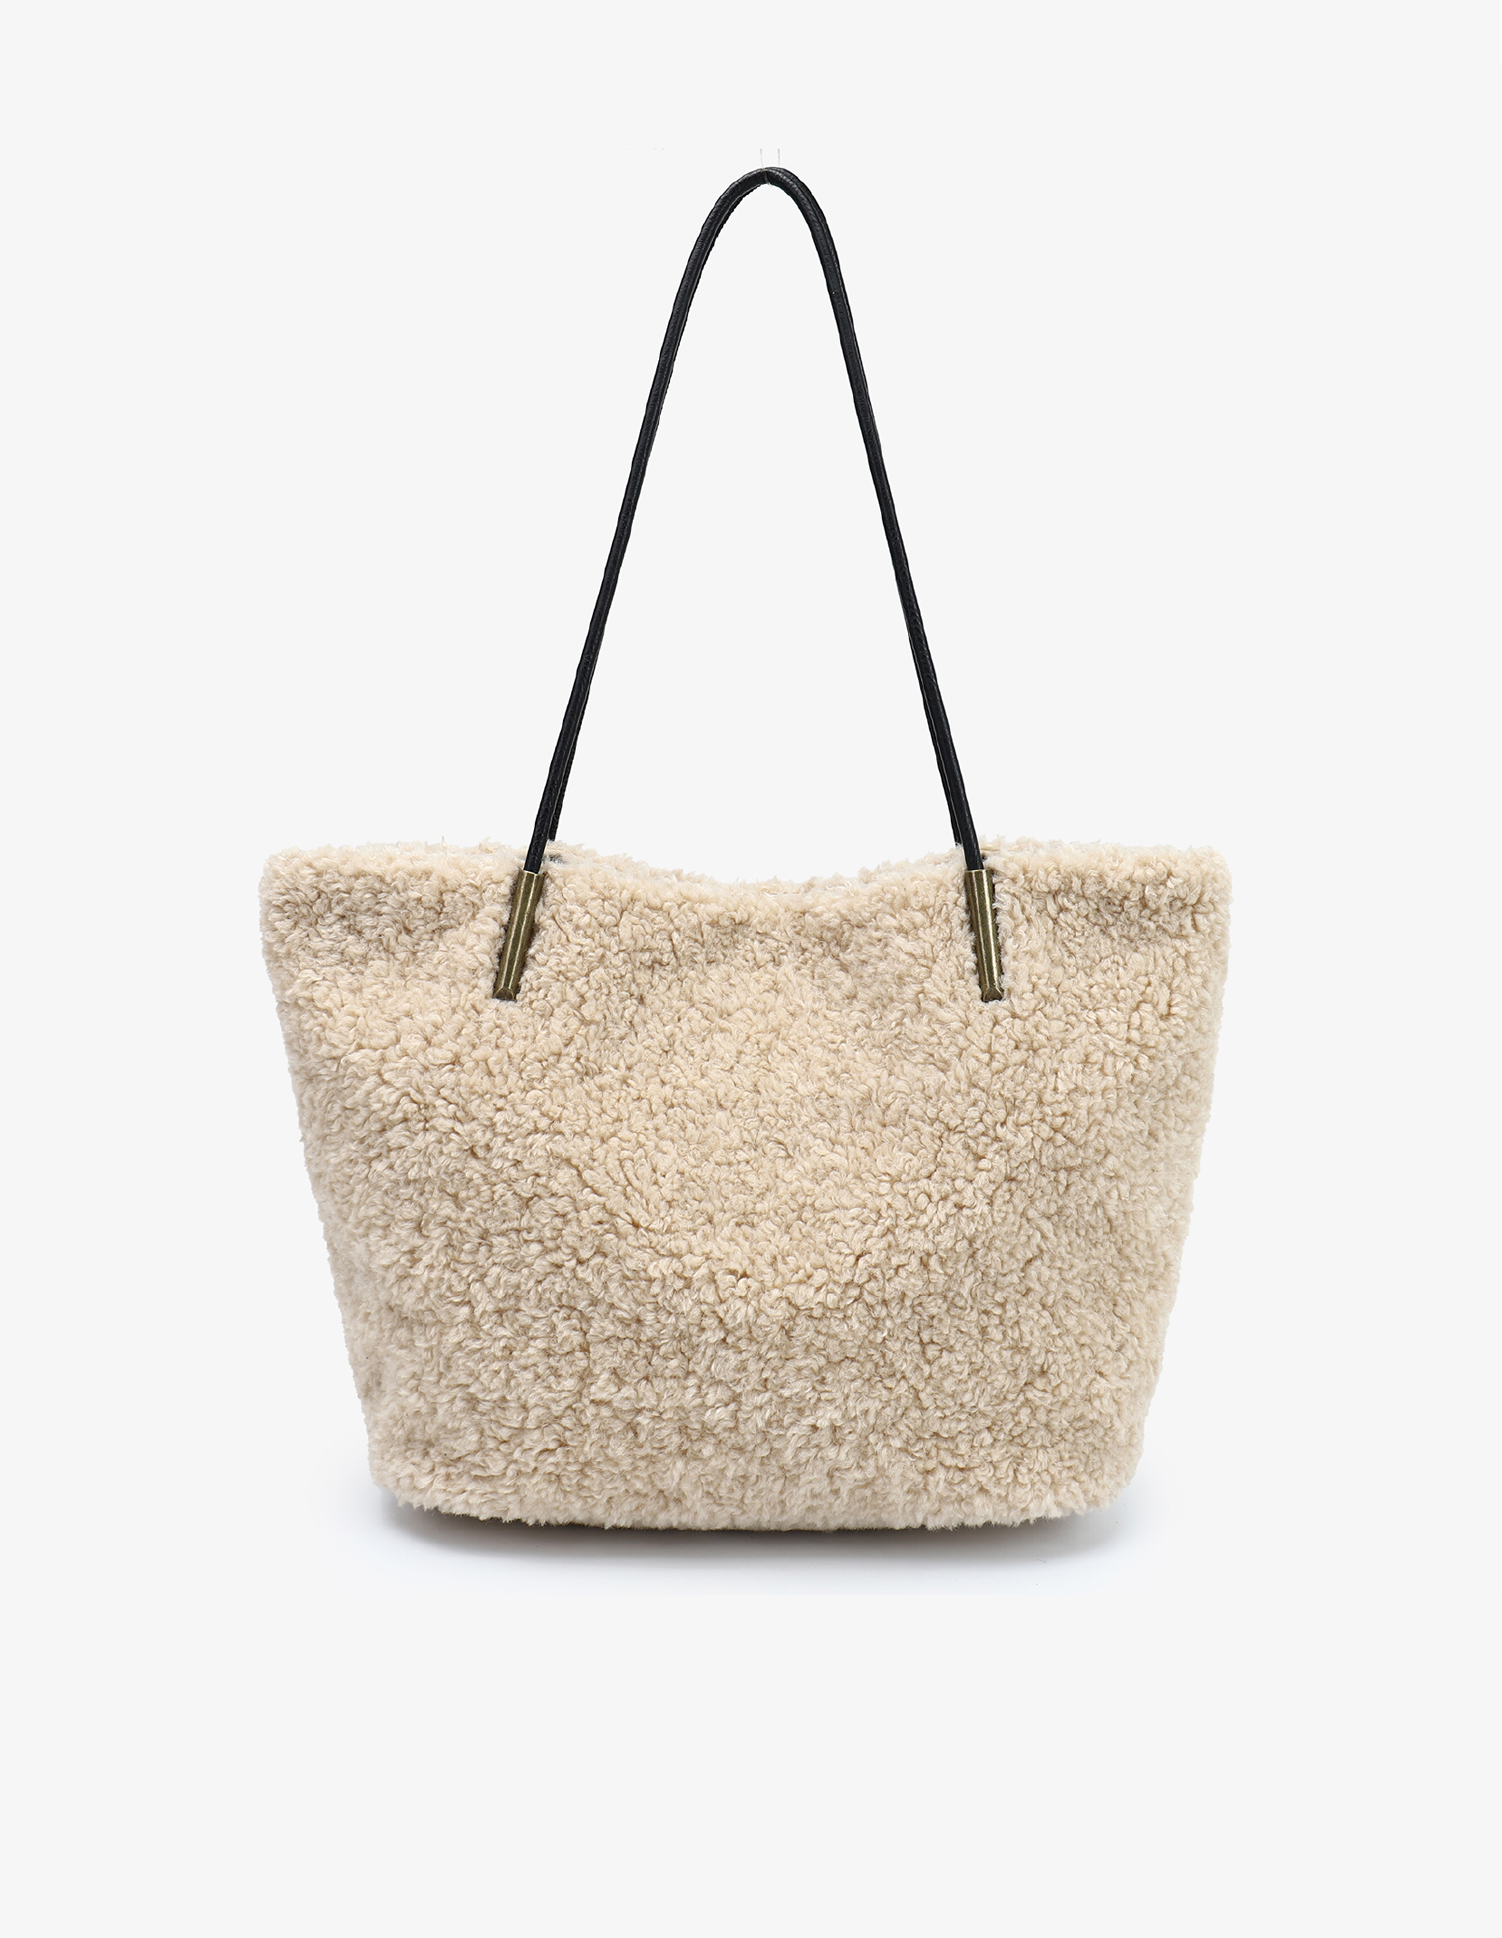 AKIMBO EAST WEST TOTE SHEARLING CREAM